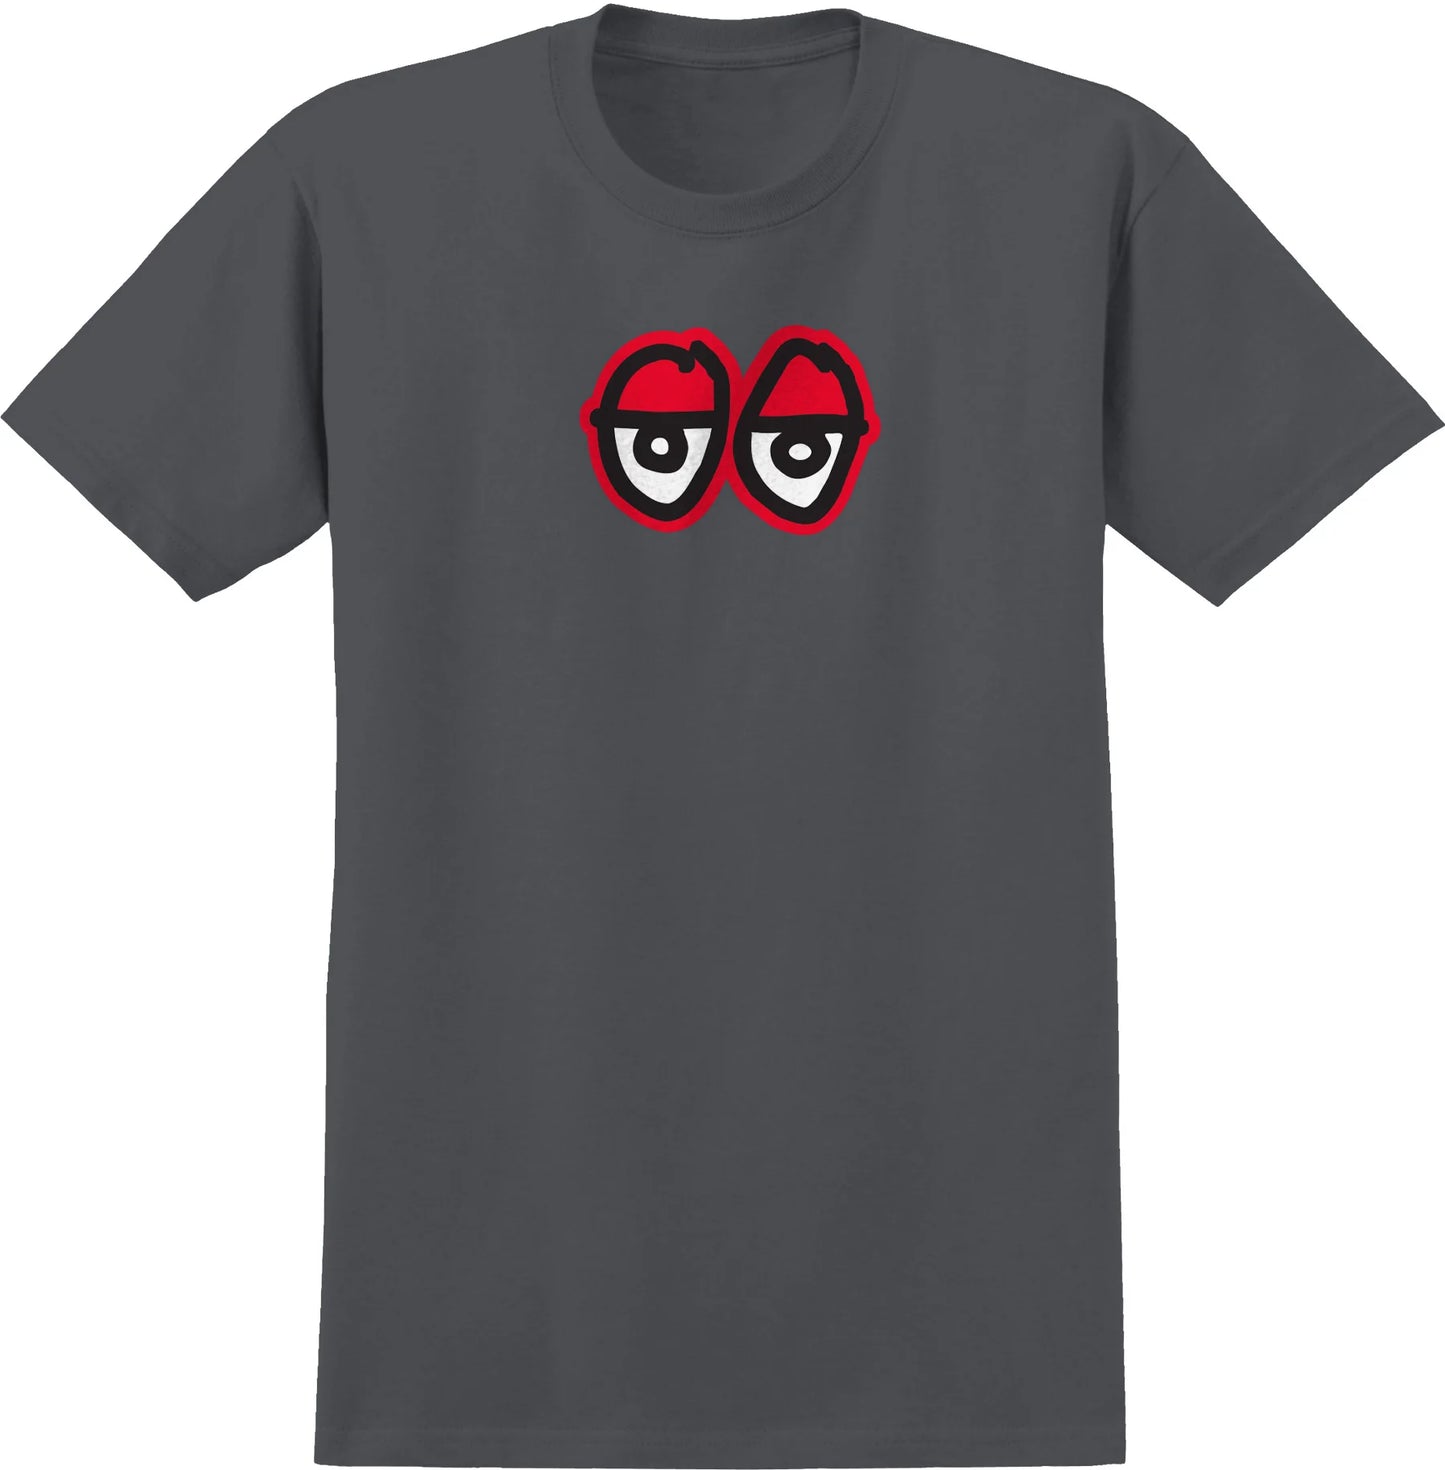 Krooked Eyes S/S T-Shirt (Charcoal/Red)